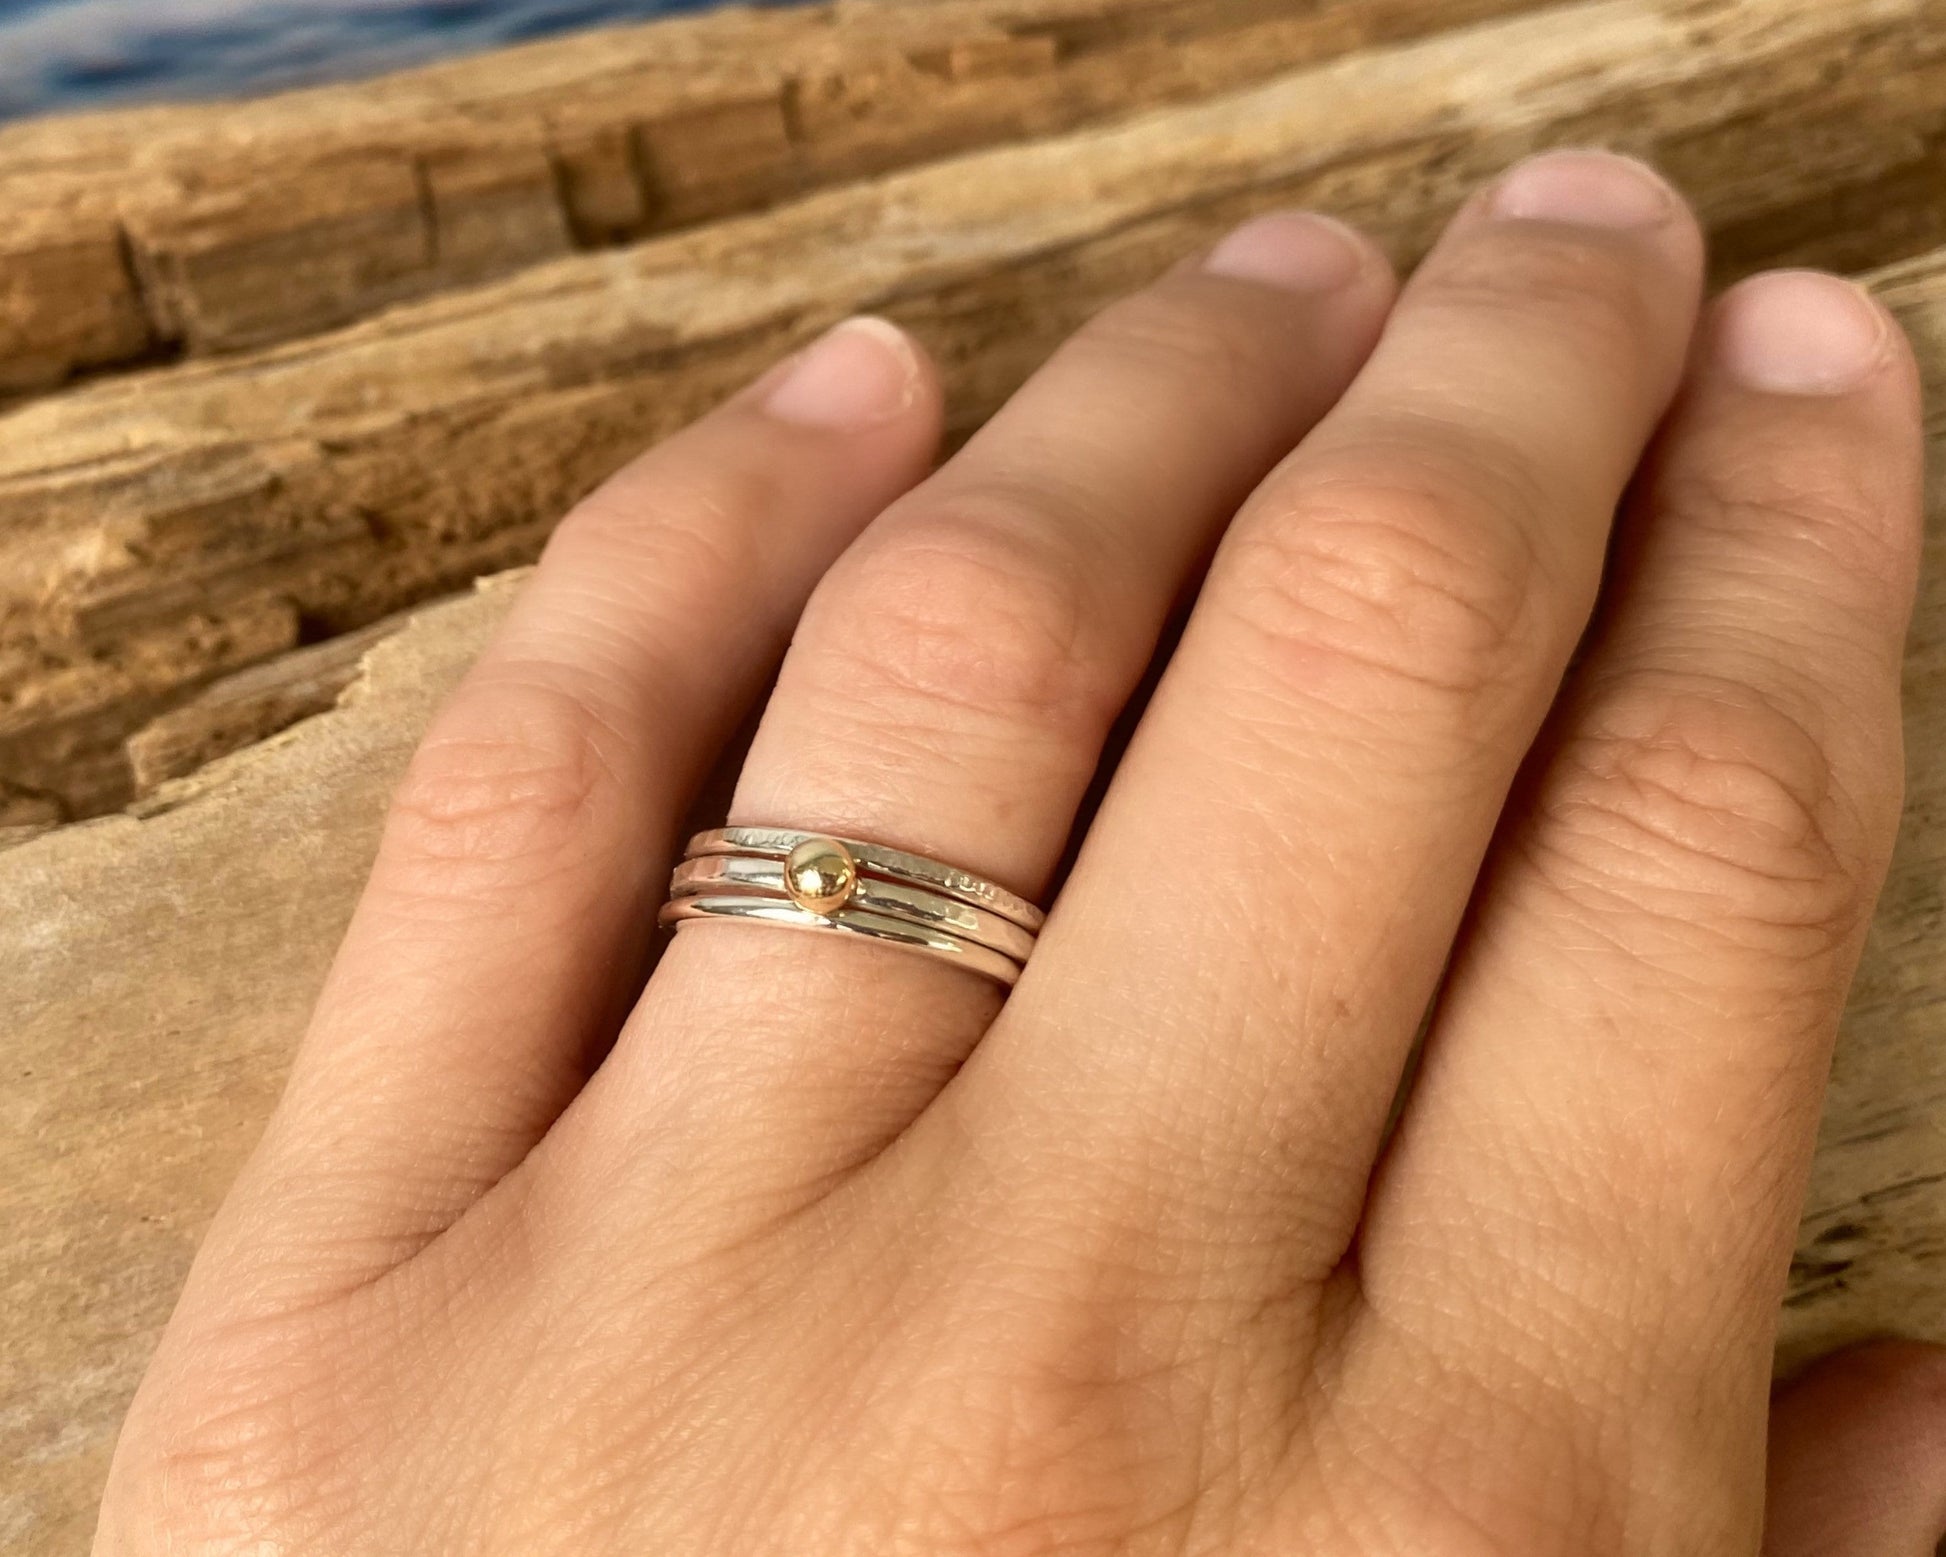 Hallmarked 9ct Gold Nugget on a 1.8mm 925 Sterling Silver Ring, Hammered Ring Band, Handmade Stacking Ring, Minimalist Ring